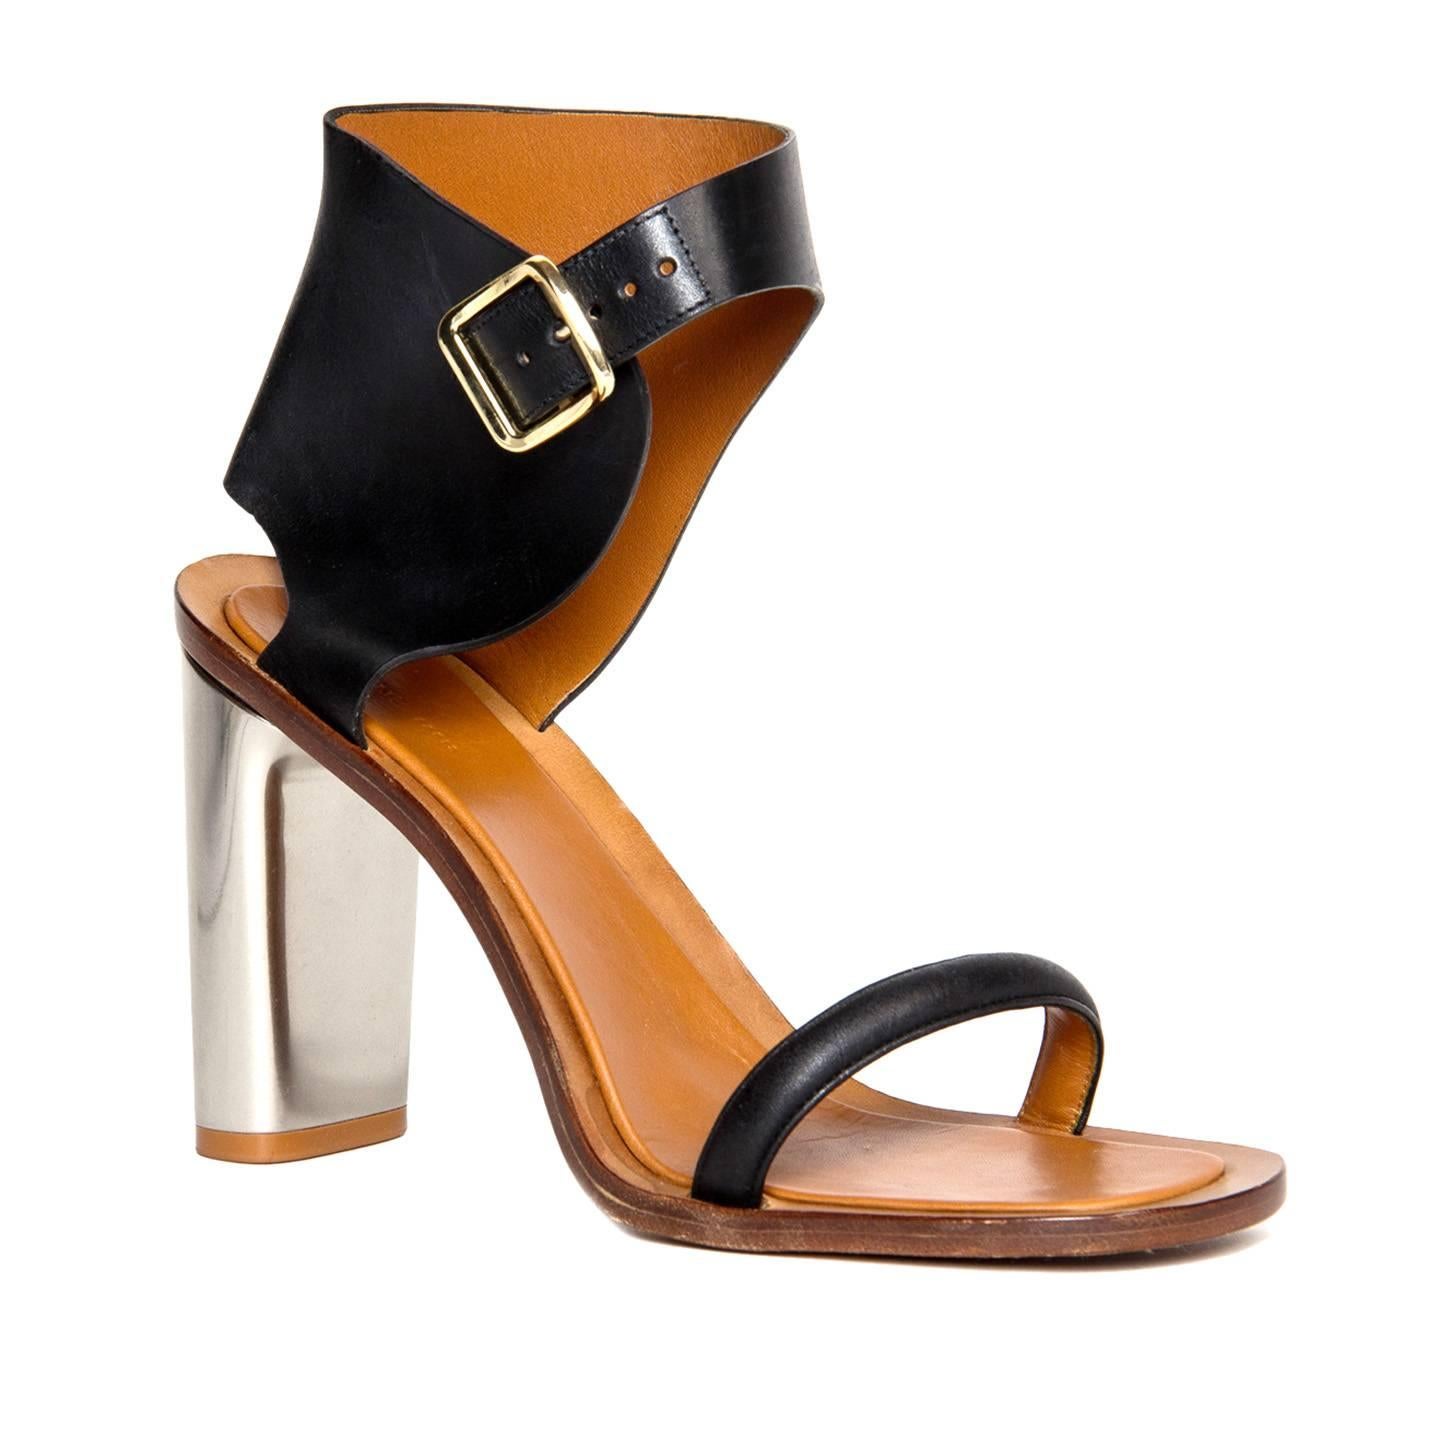 Black leather sandals fastening at ankle with a gold buckle. The sole is natural color and the chunky heel is made of silver metal. Designed by Phoebe Philo. Made in Italy. Heel 4